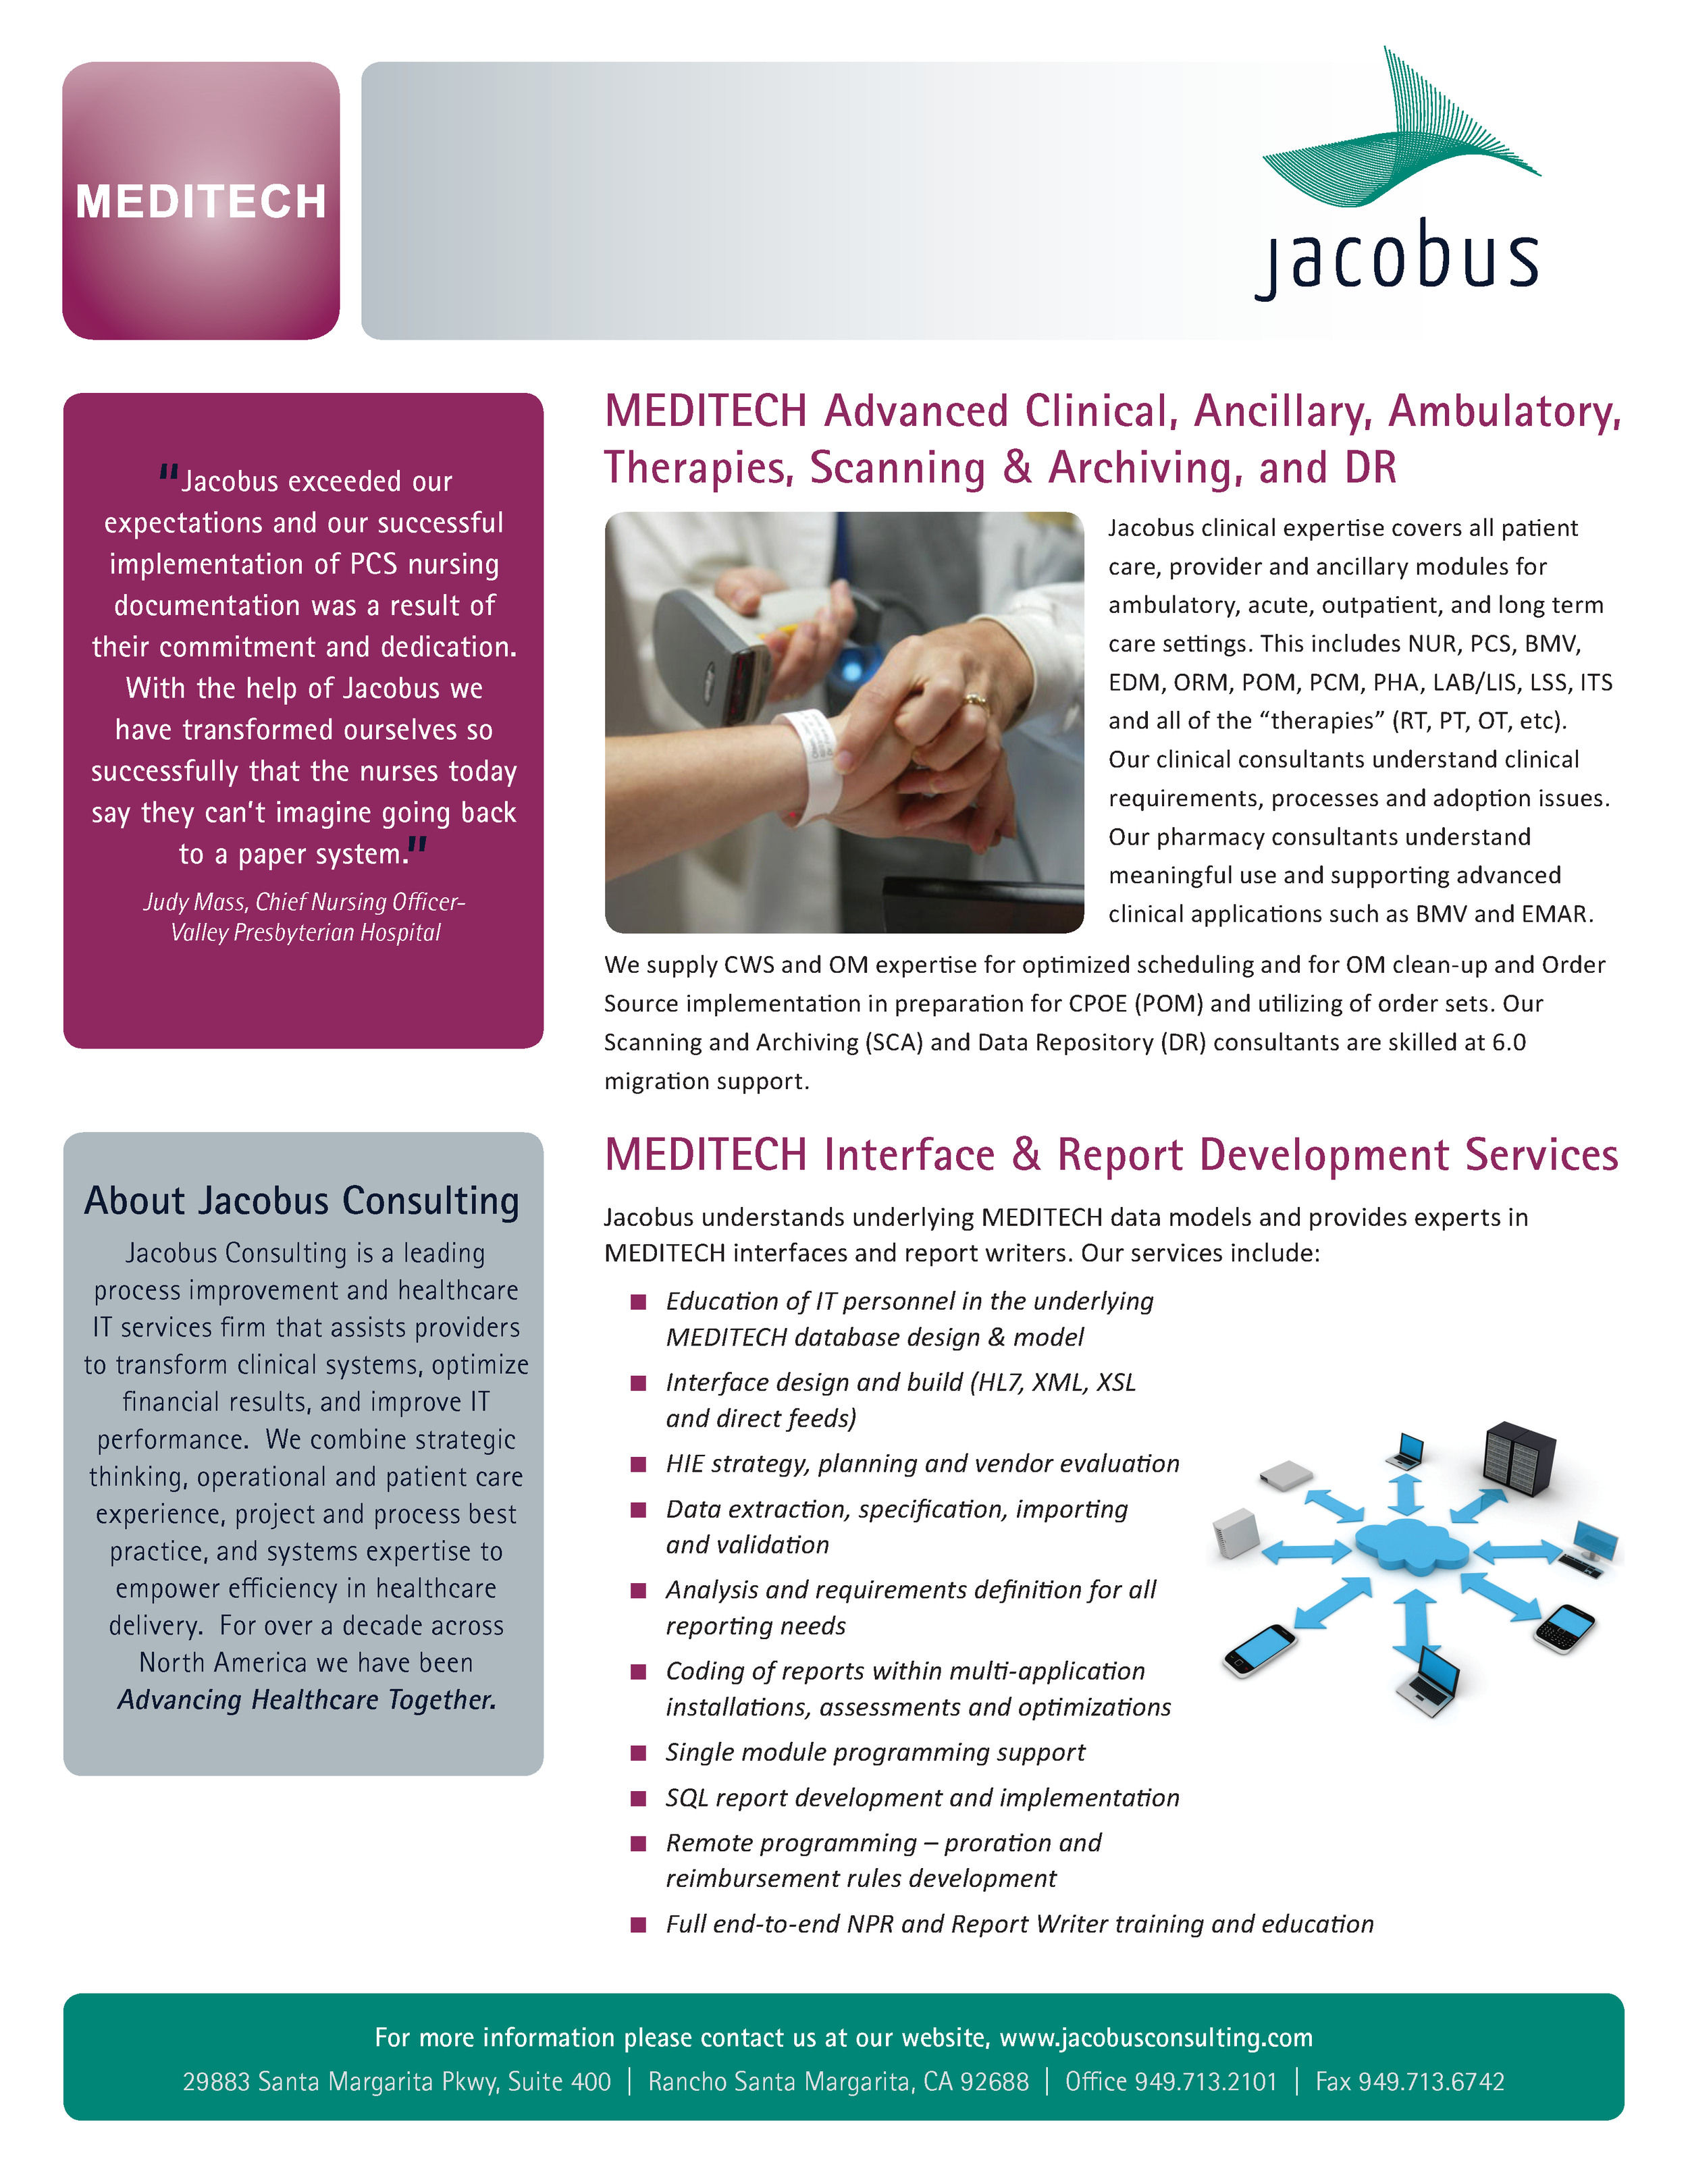 JC_MEDITECHServices_PRINT_Page_2.png